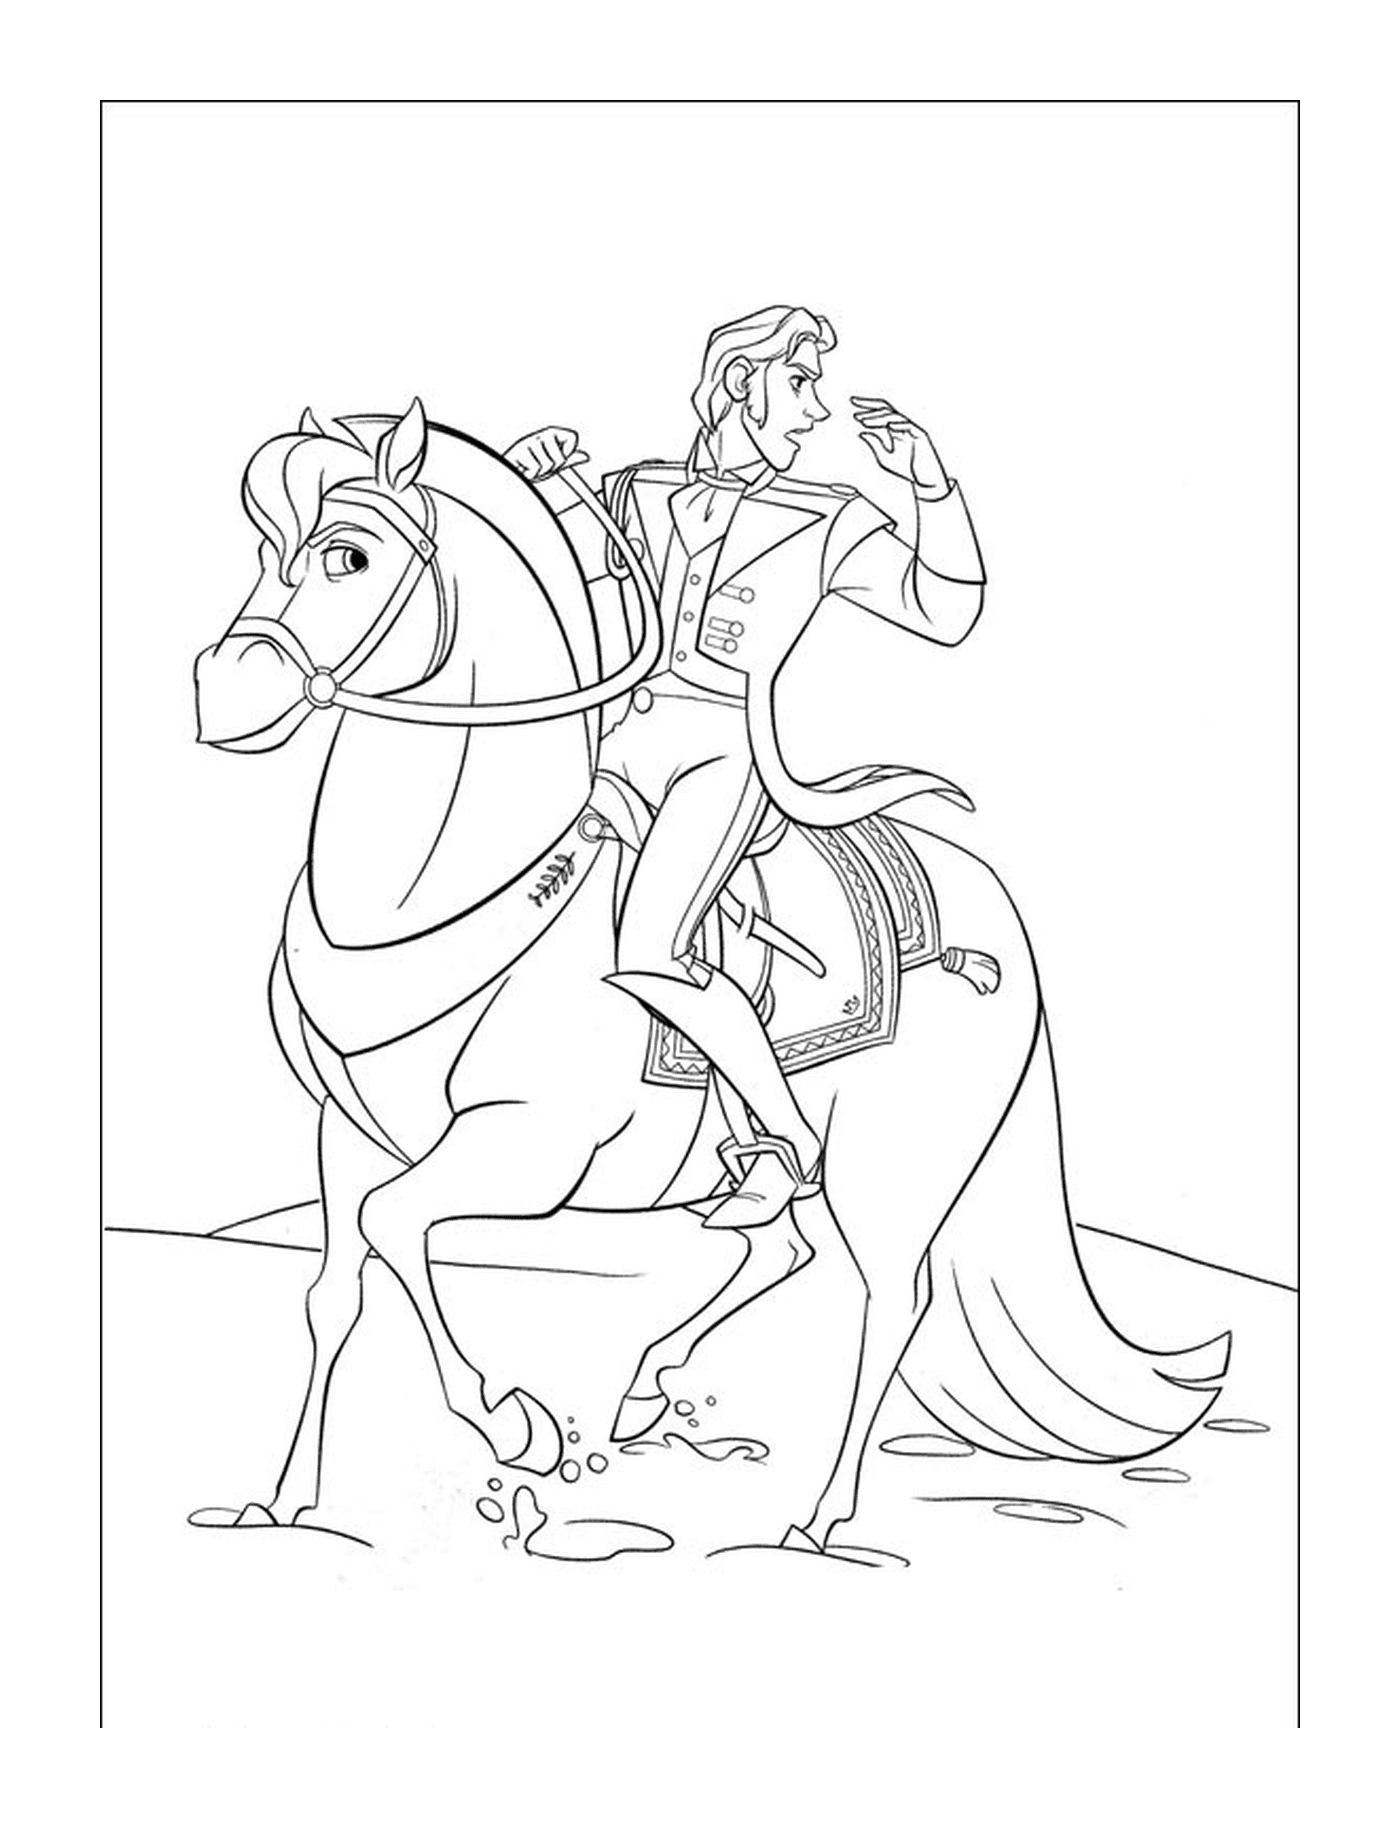  Prince Hans proudly gallops 